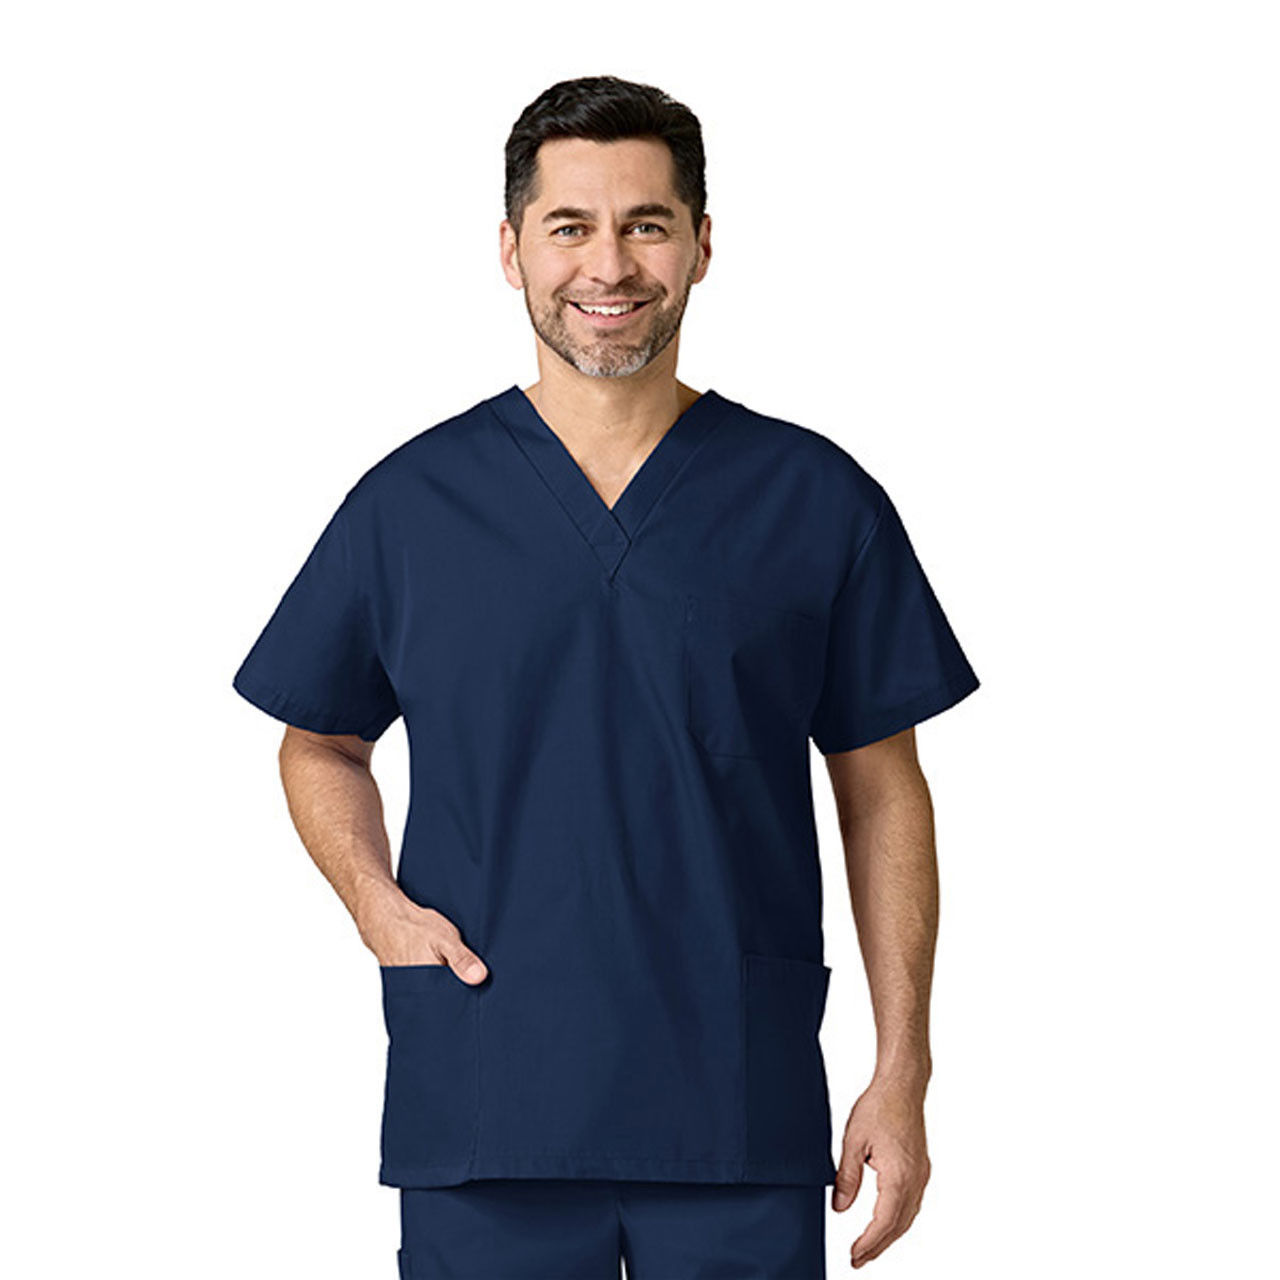 Is there any special feature in the sleeves of the Navy Blue Scrub Tops?